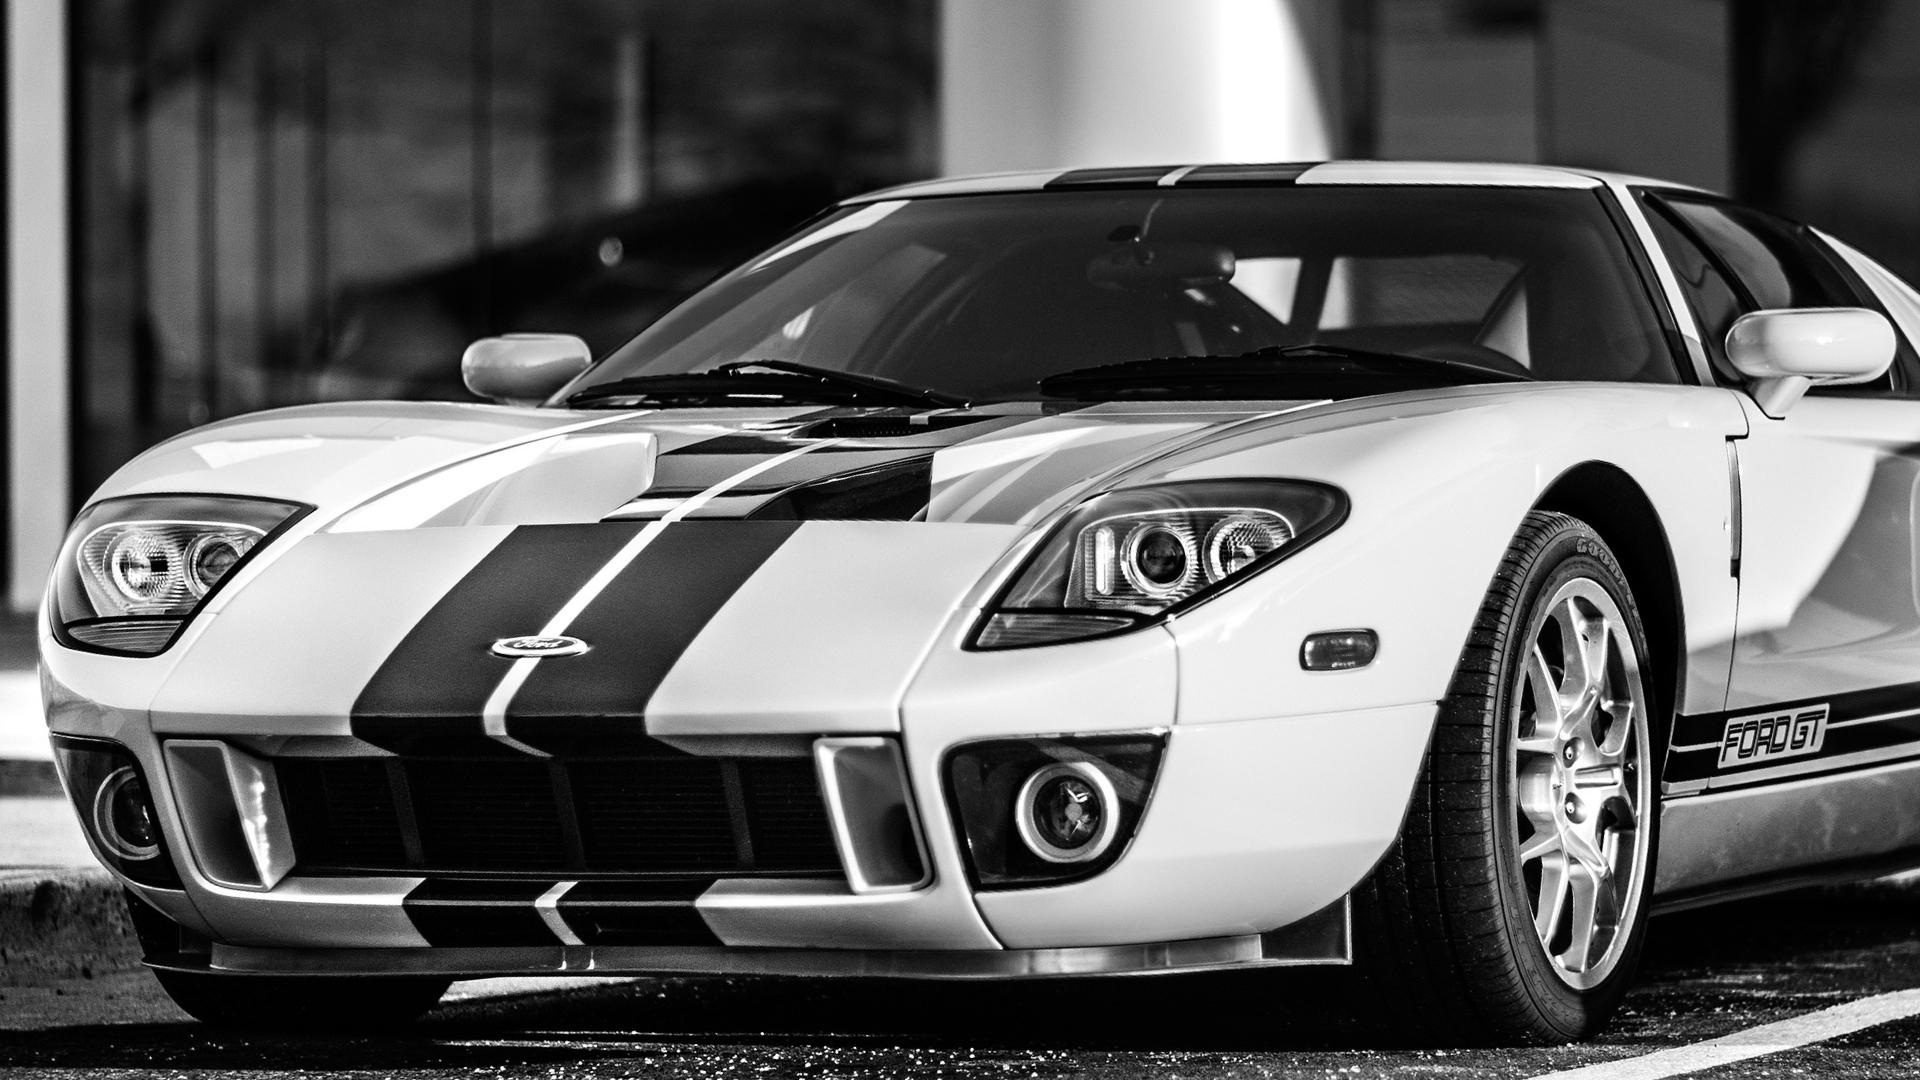 Ford GT with black strips over the vehicle, car equipped with Gorilla Glass windshield